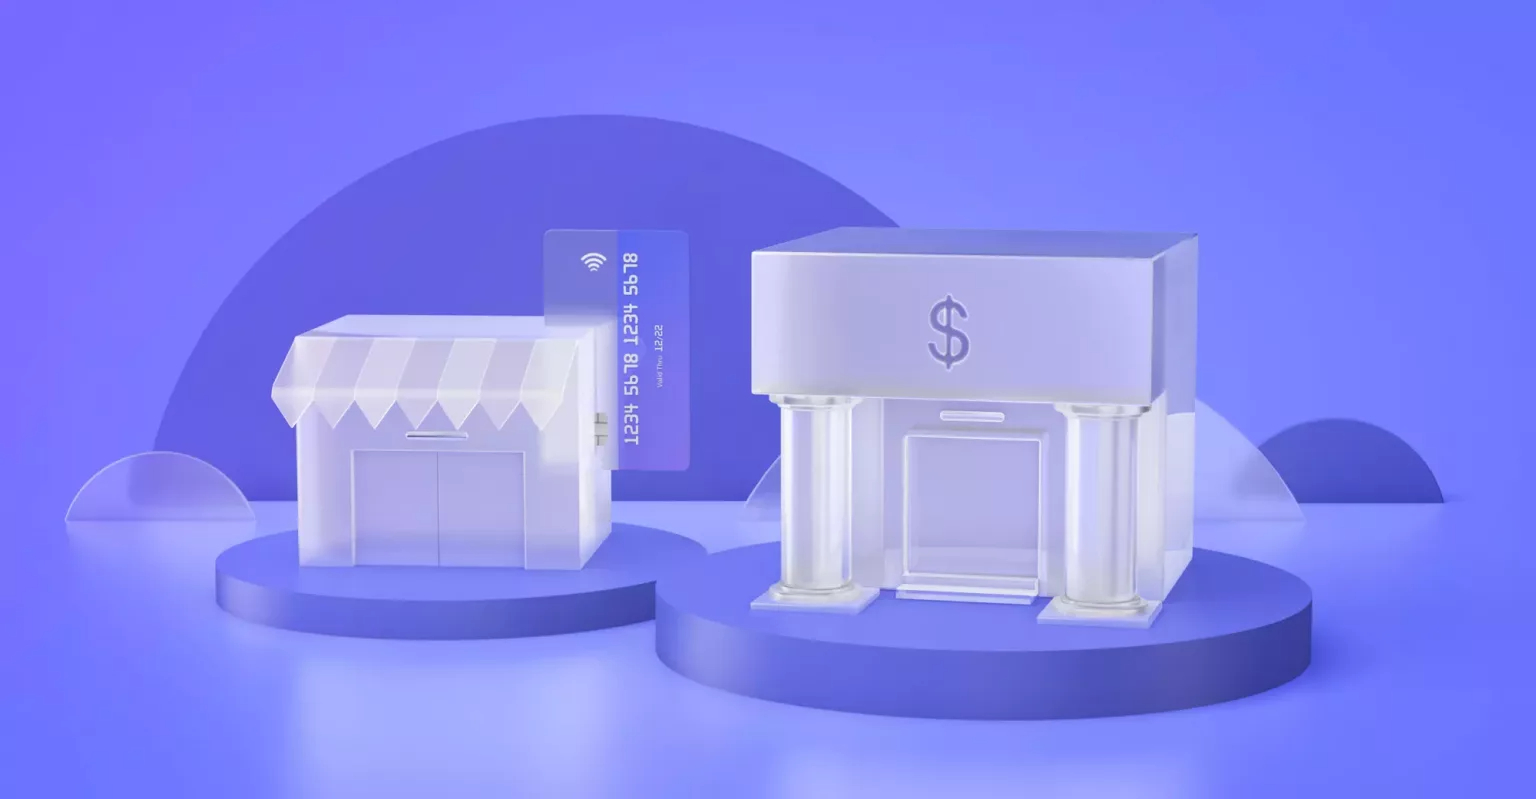 A 3d render of a building accepting a credit card swipe next to a bank